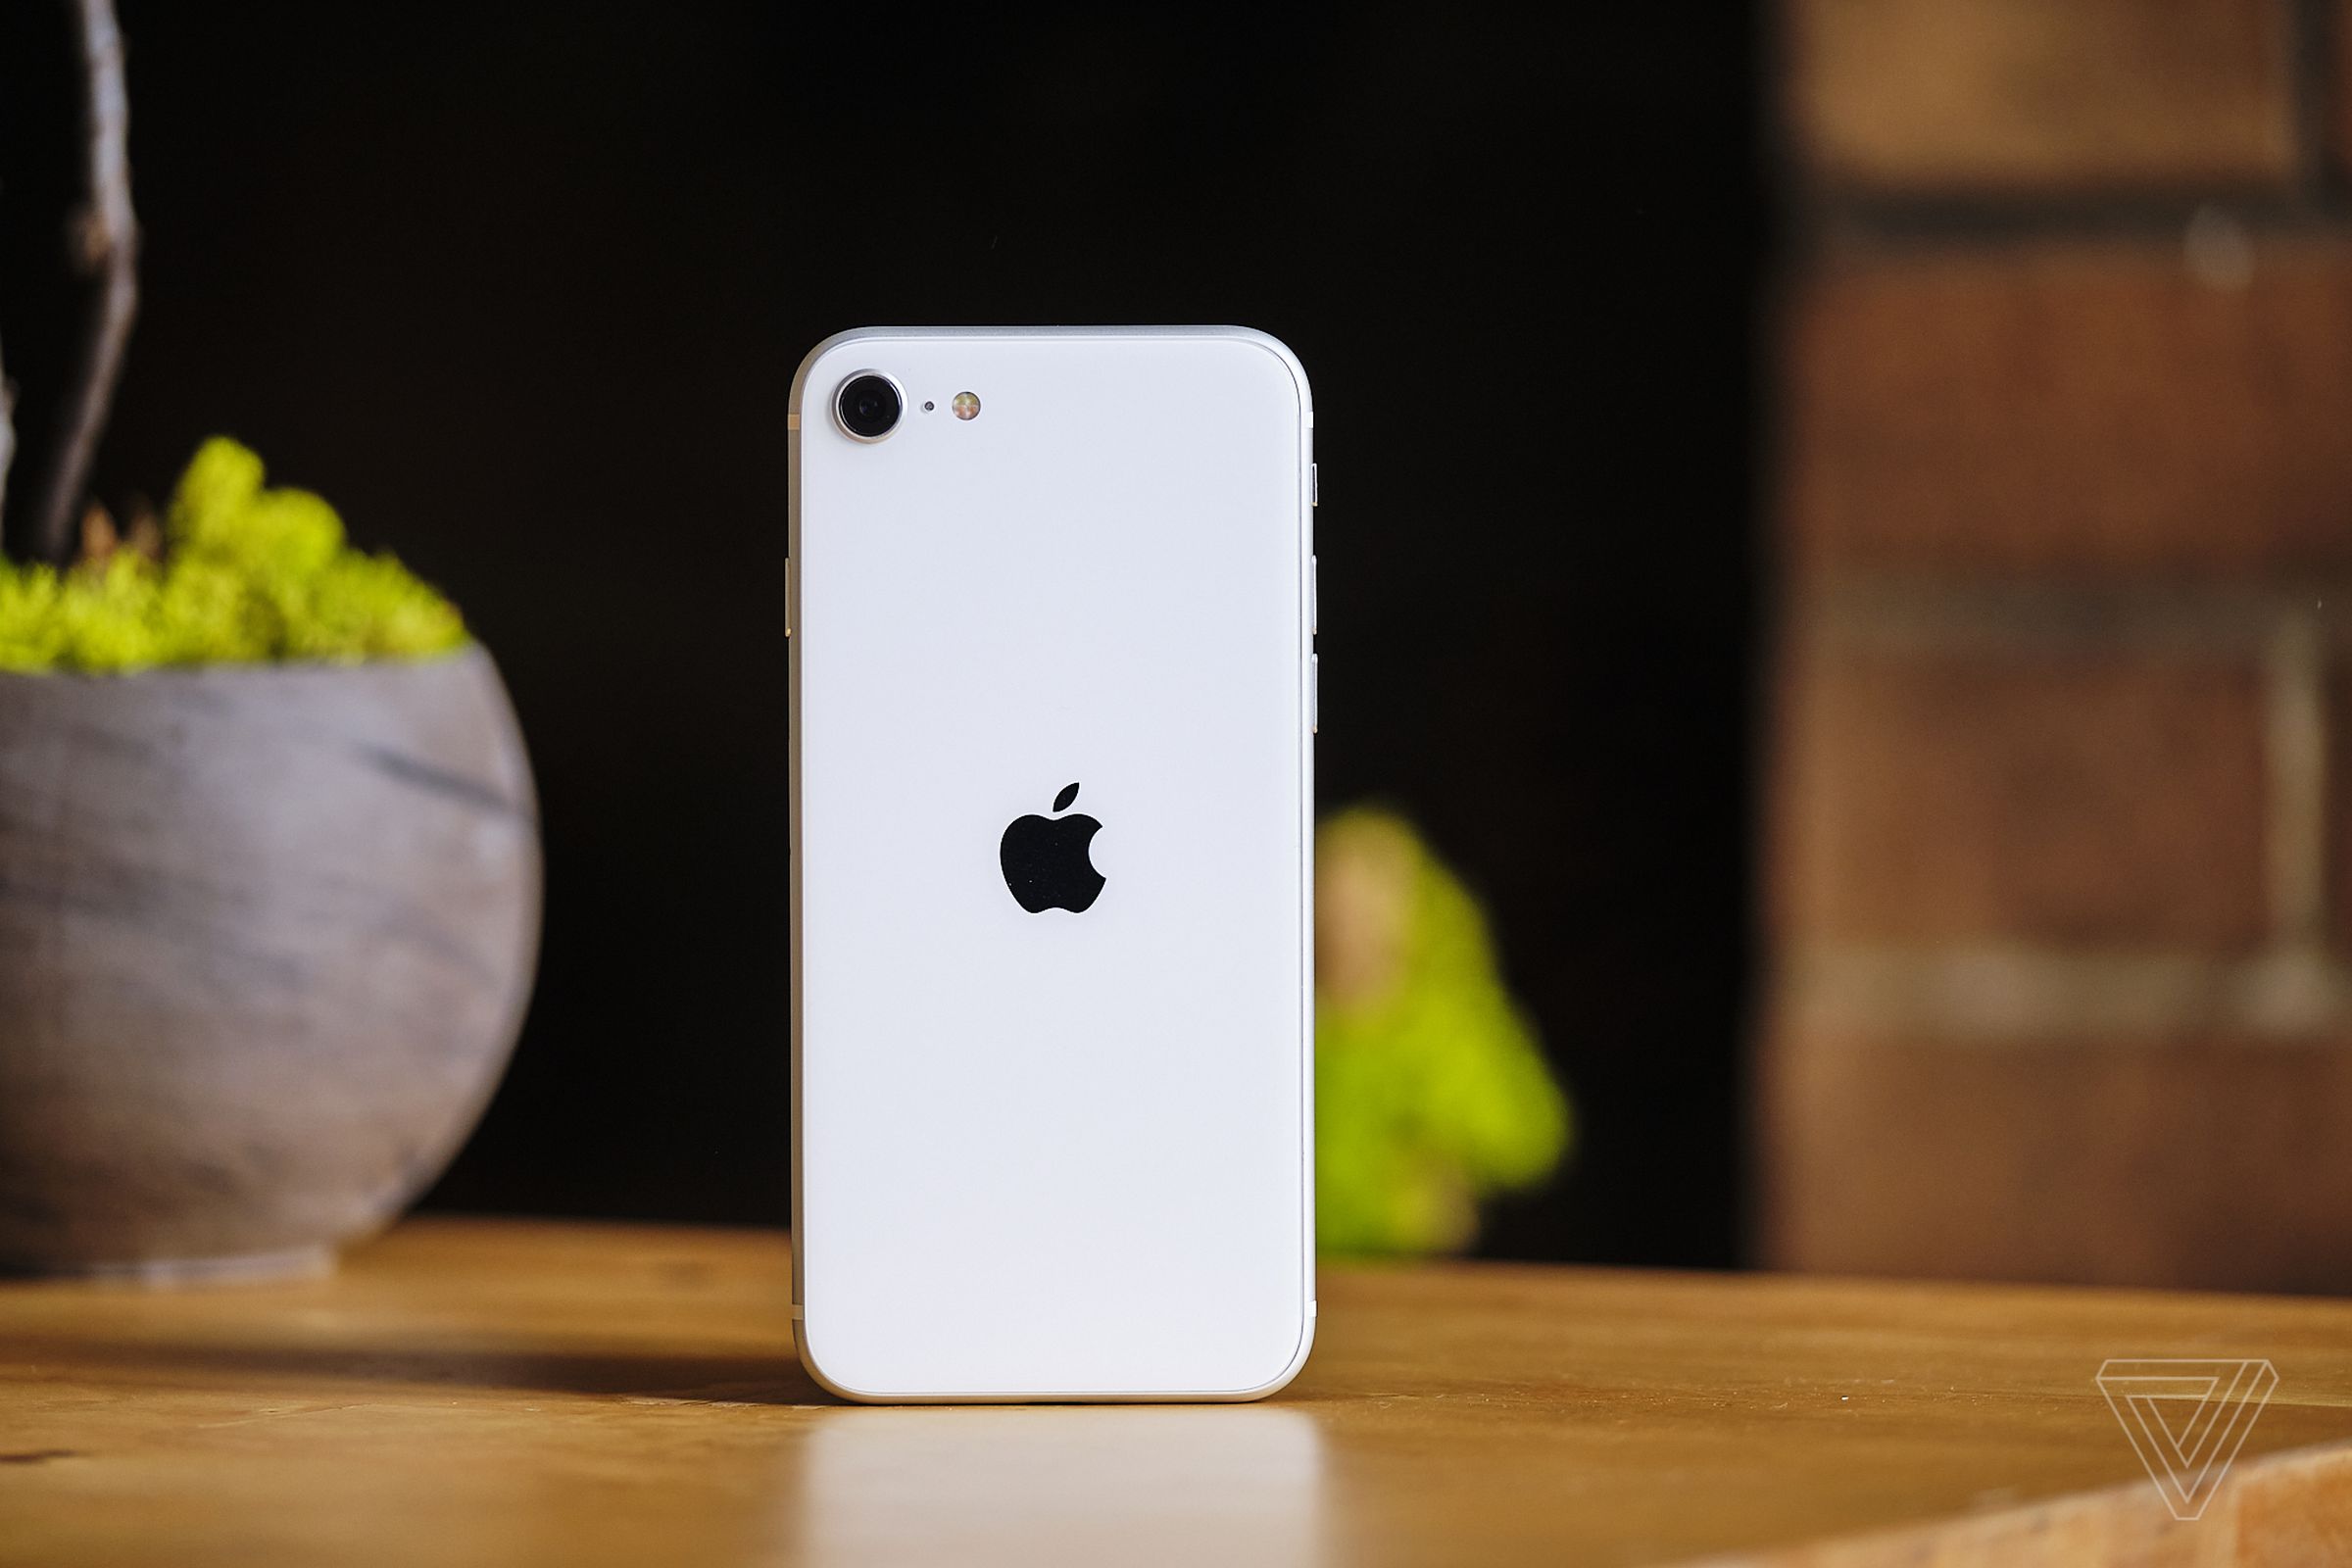 The rumored iPhone 12 mini could replace the iPhone SE (pictured) as Apple’s smallest handset. 